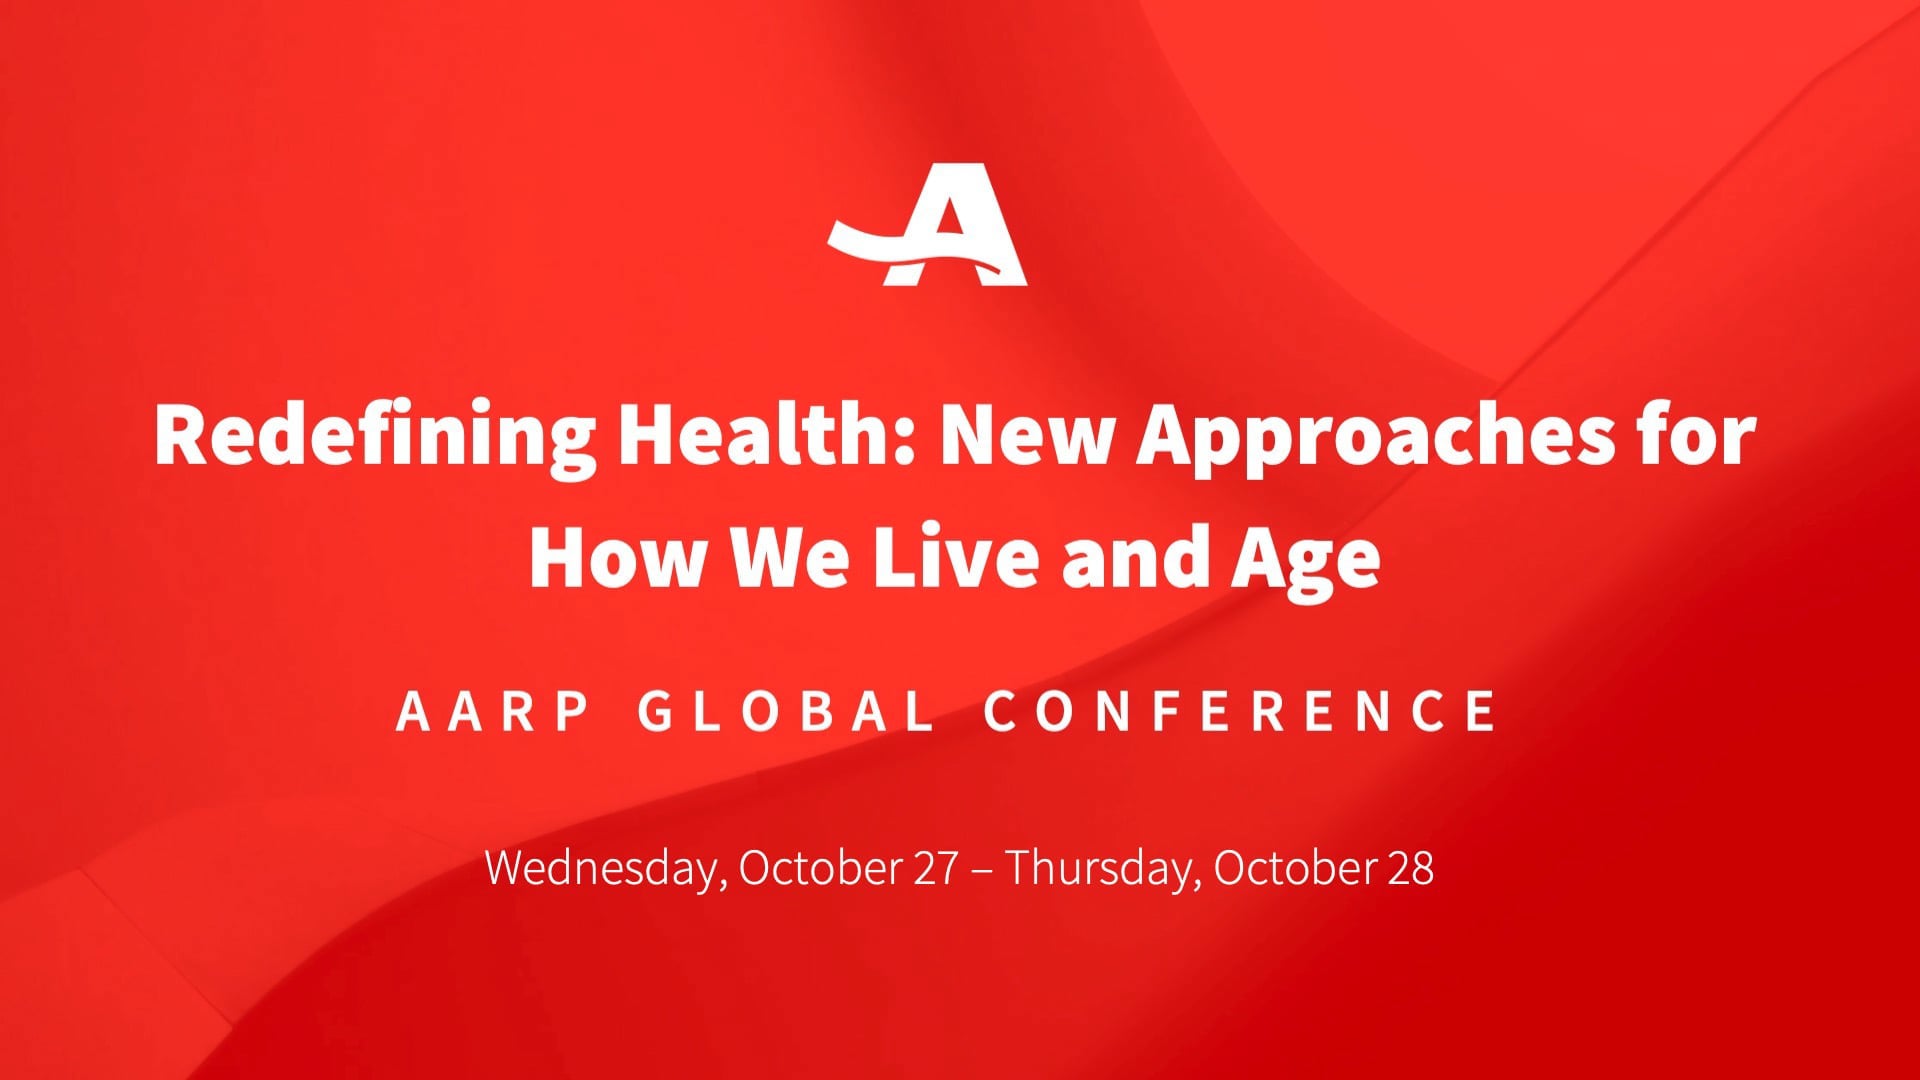 AARP Global Conference on Vimeo